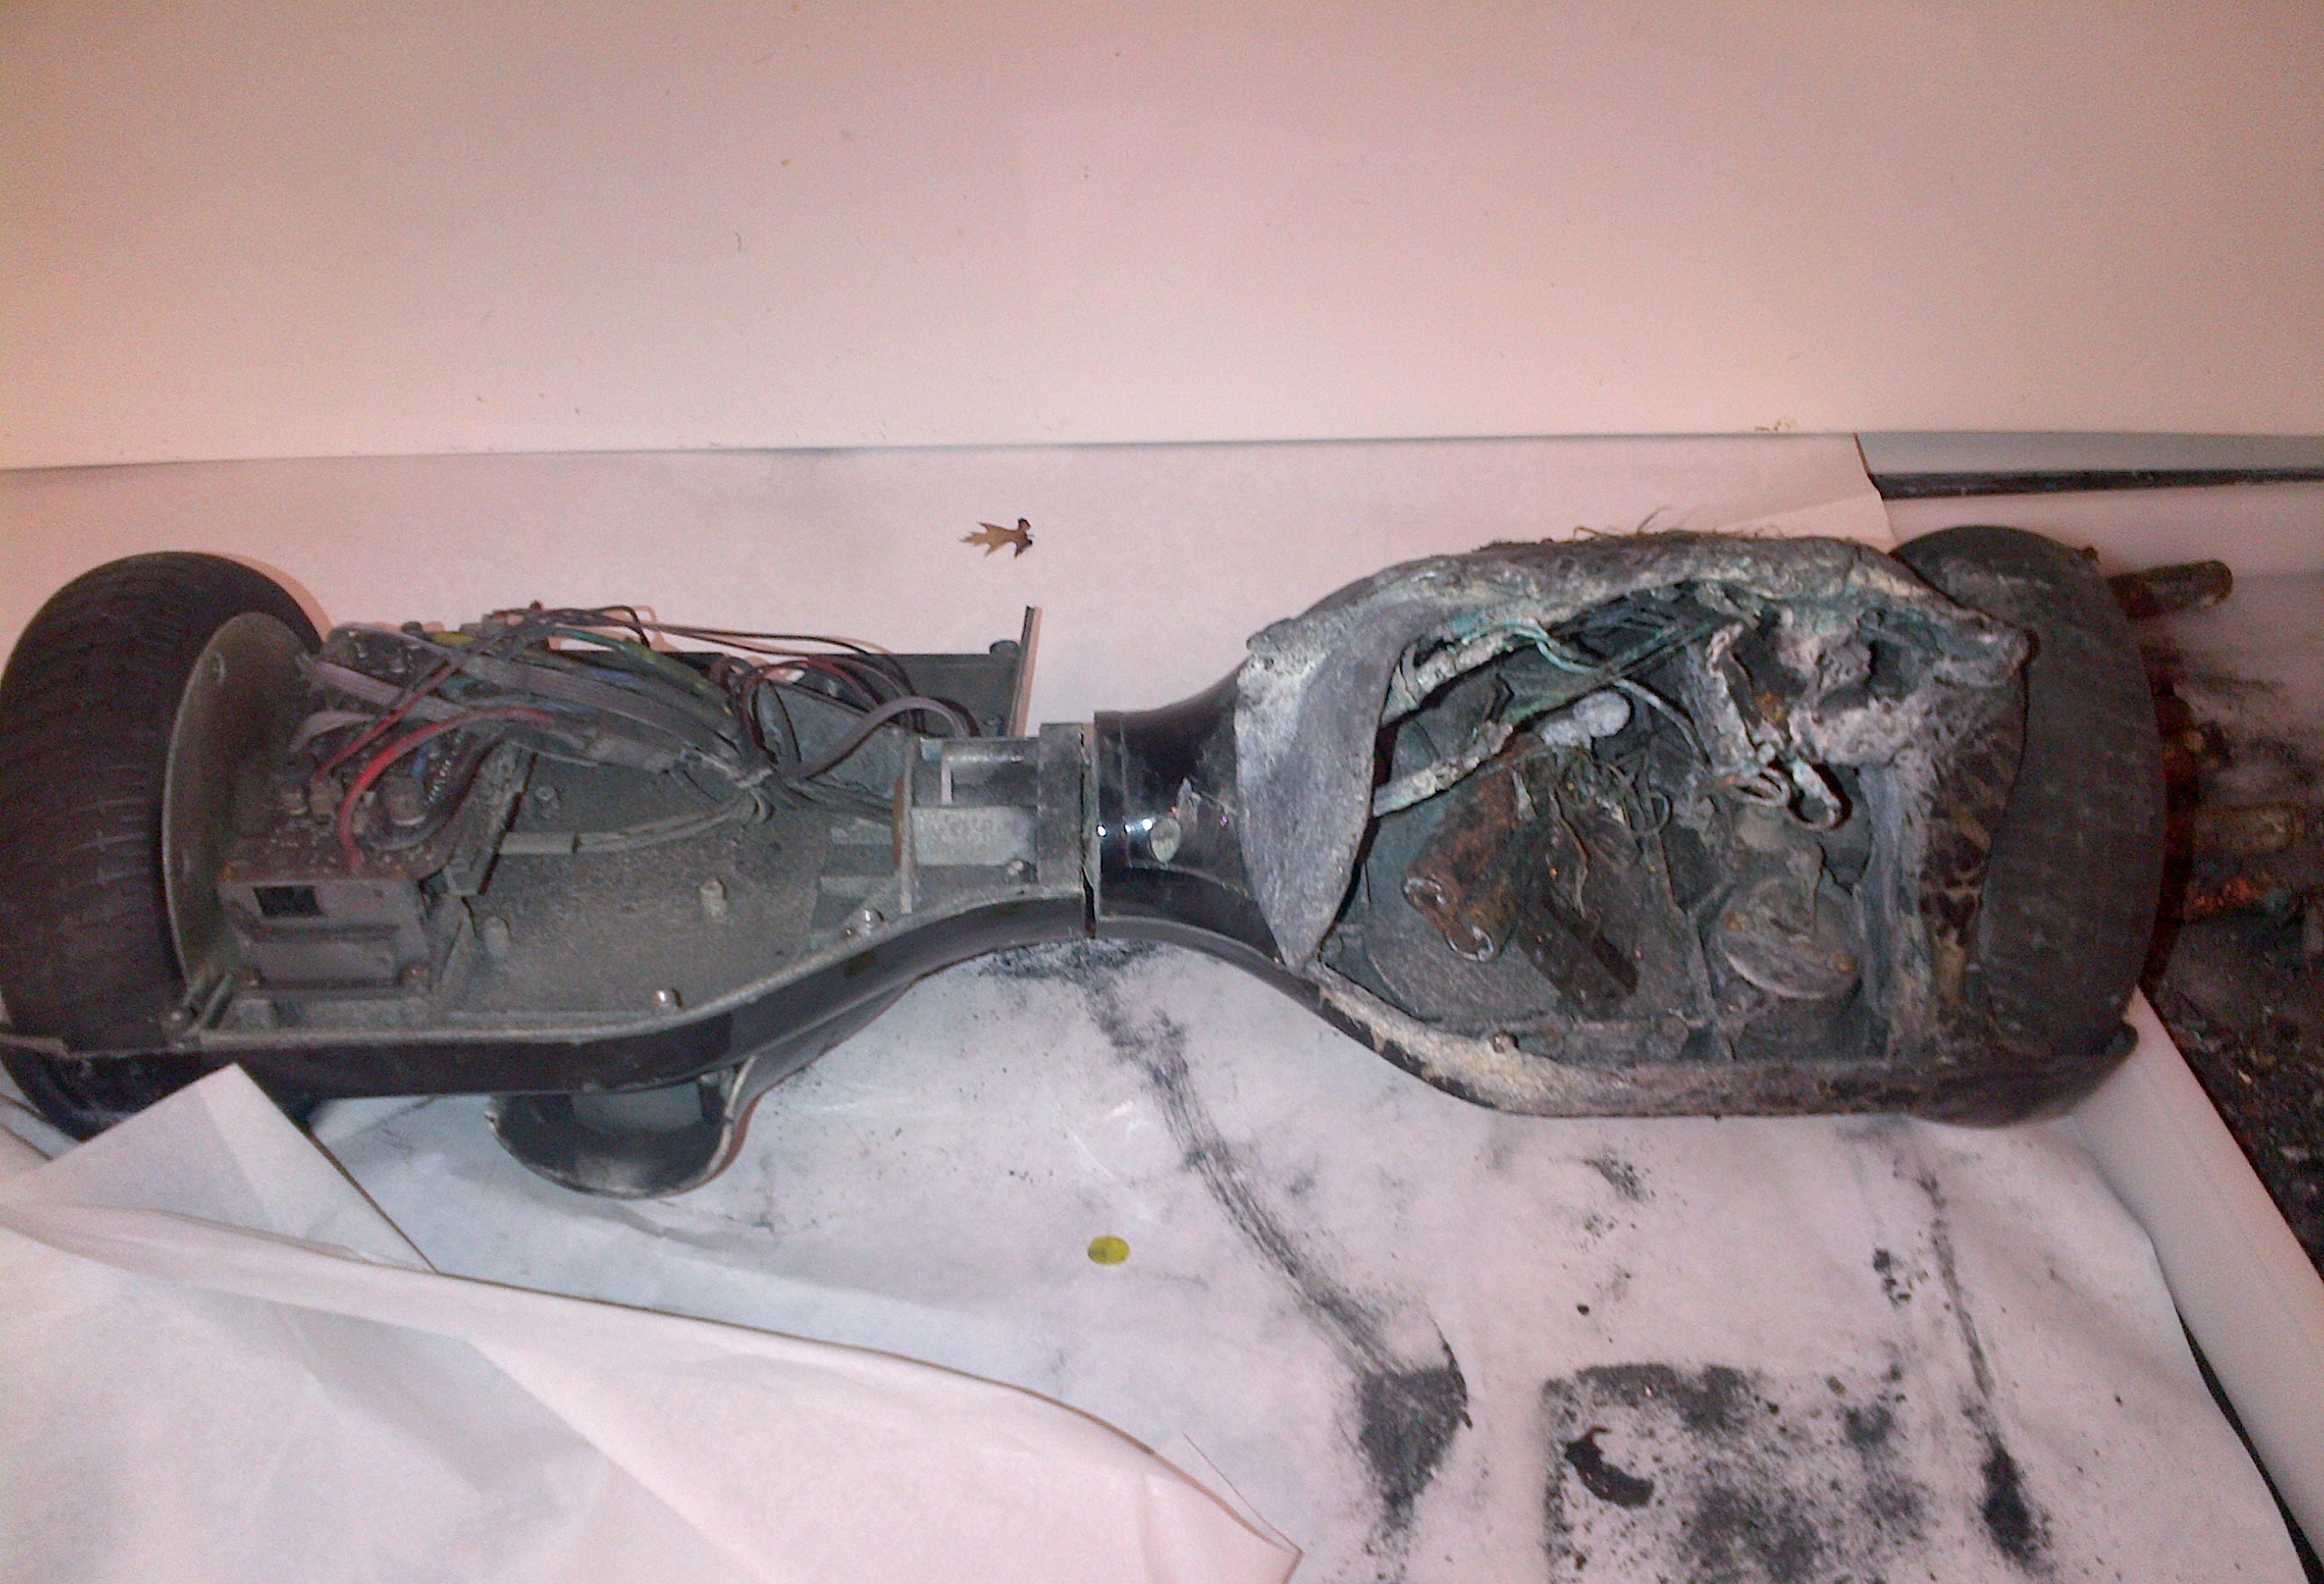 CPSC Intensifies Investigation Into Exploding “Hoverboards,” USPS Restricts Shipments